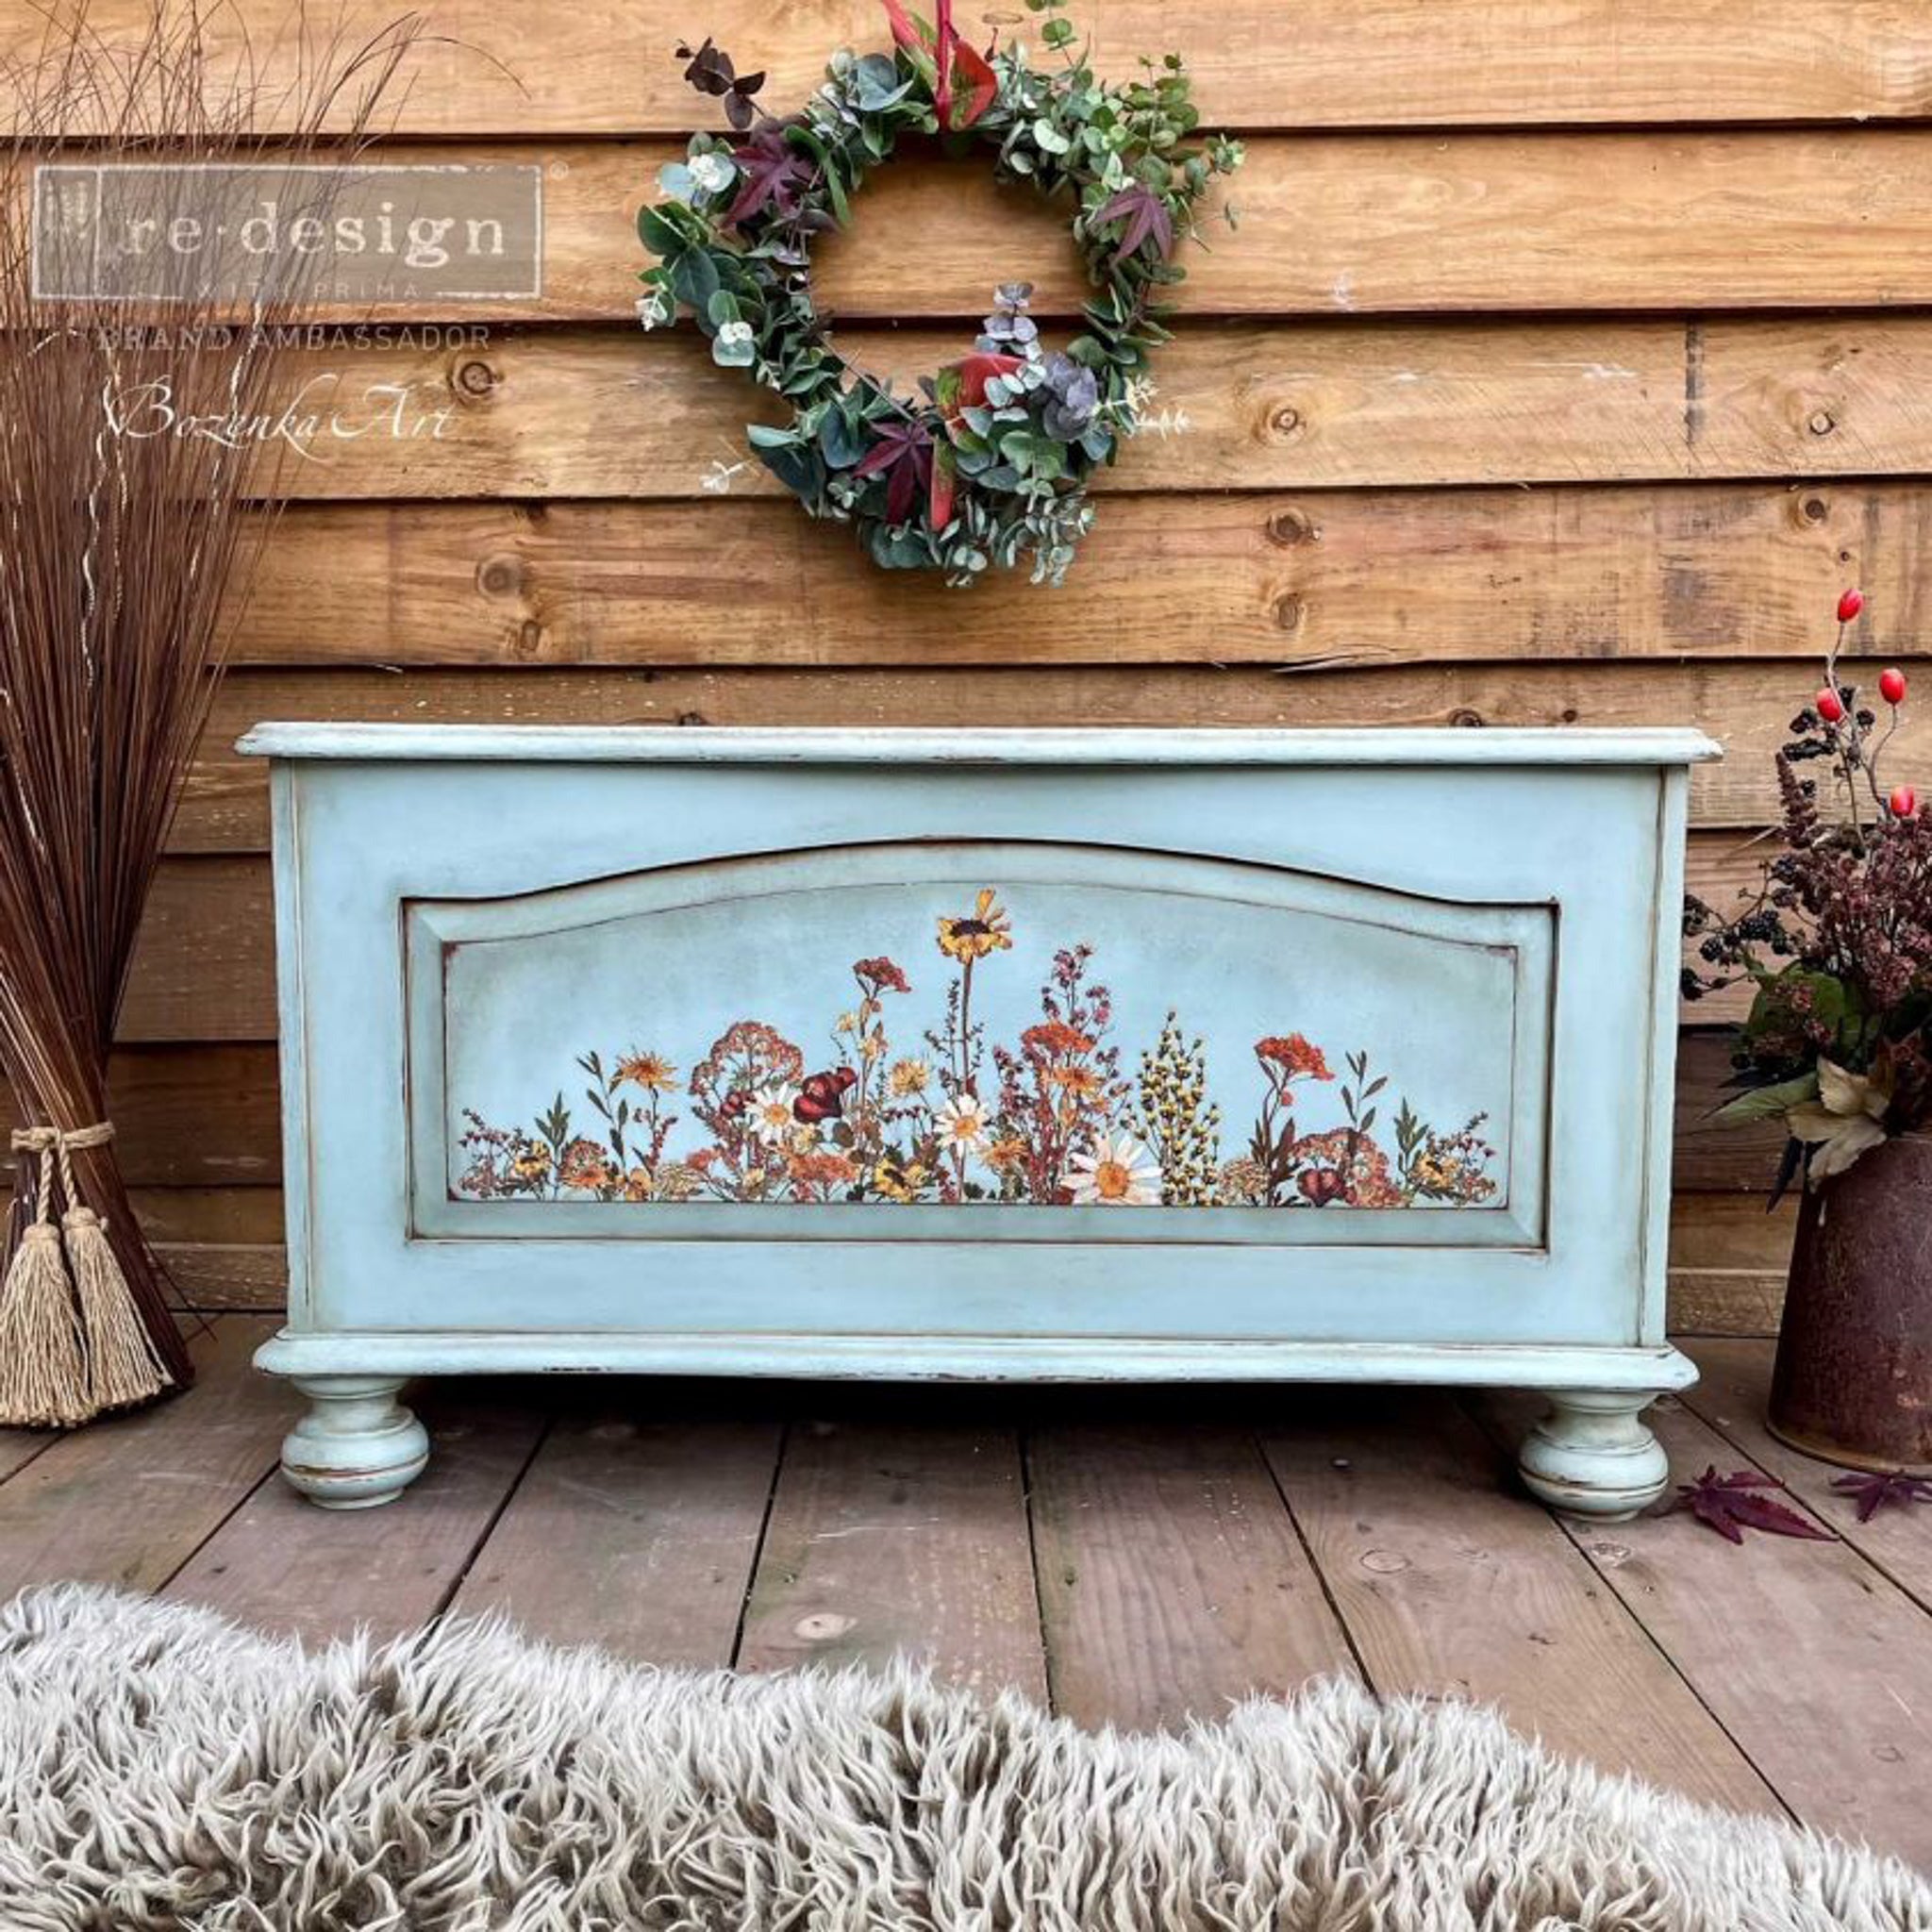  A vintage storage chest refurbished by Bozenka Art is painted pale blue and features the Dried Widflowers small transfer on it.